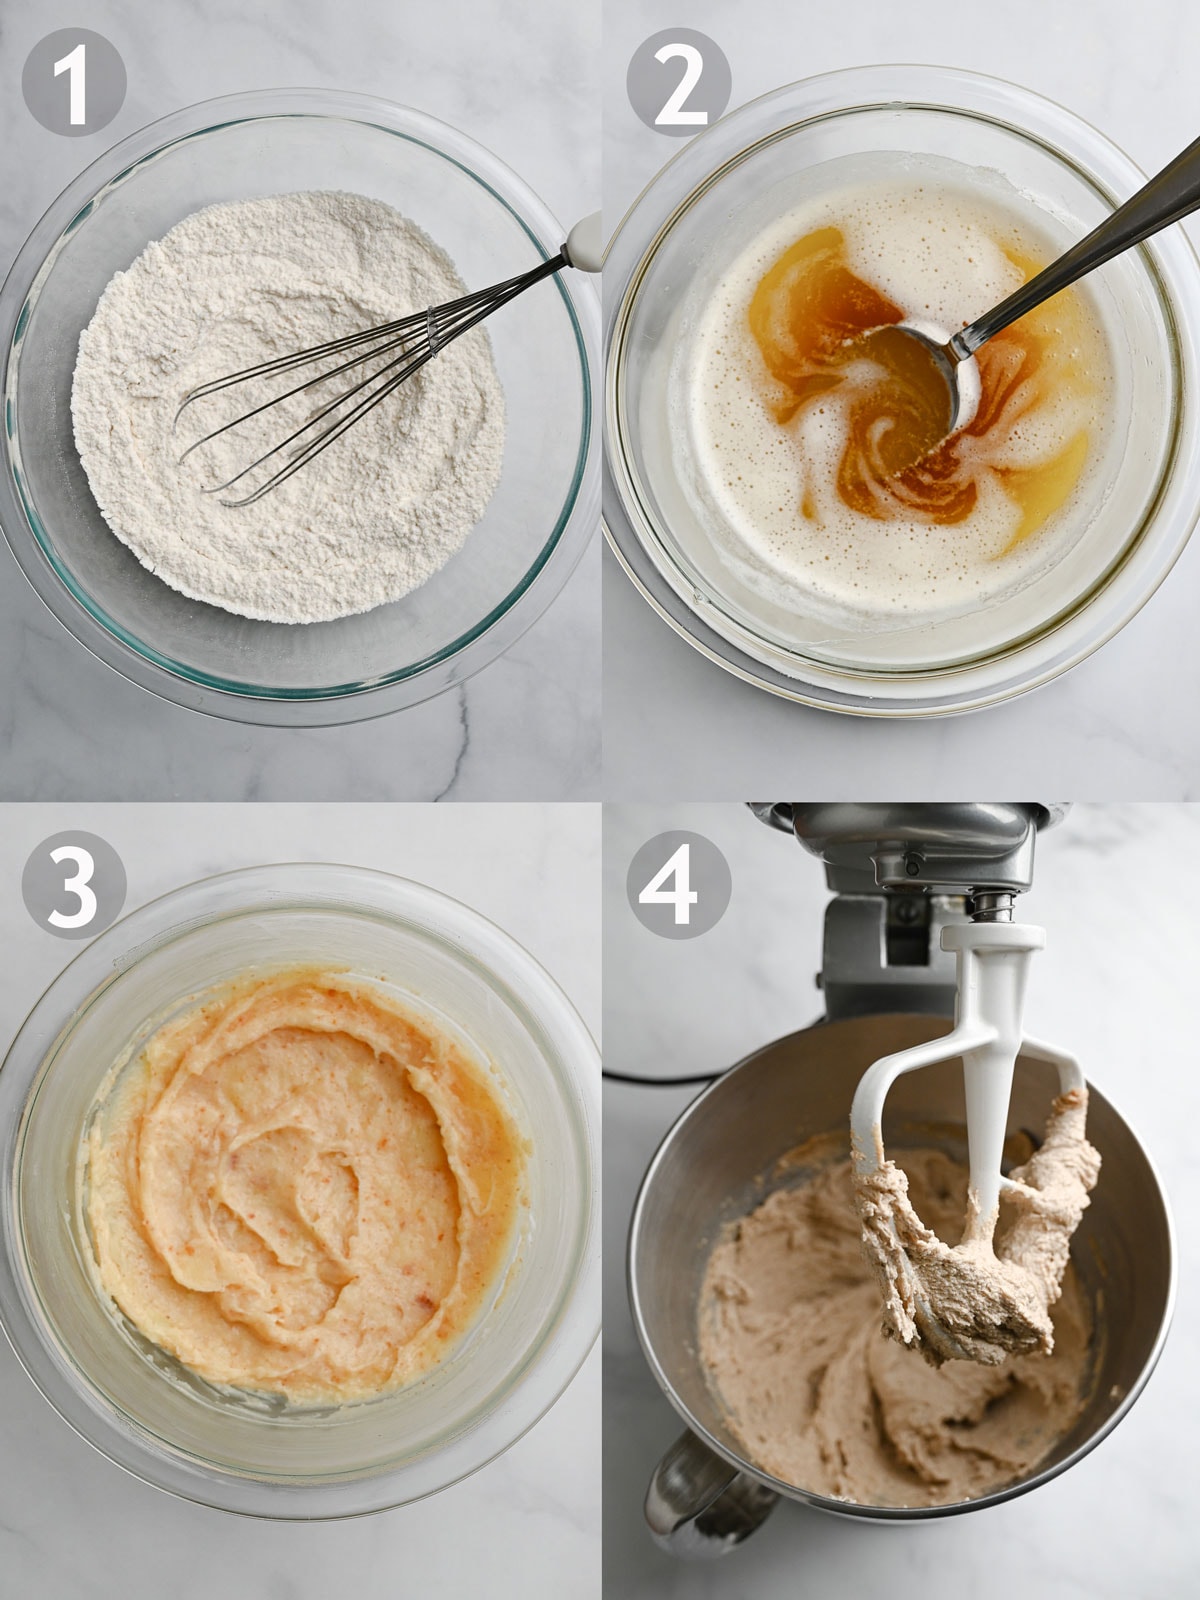 Steps to make cookies including mixing dry ingredients, making brown butter and combining wet ingredients.